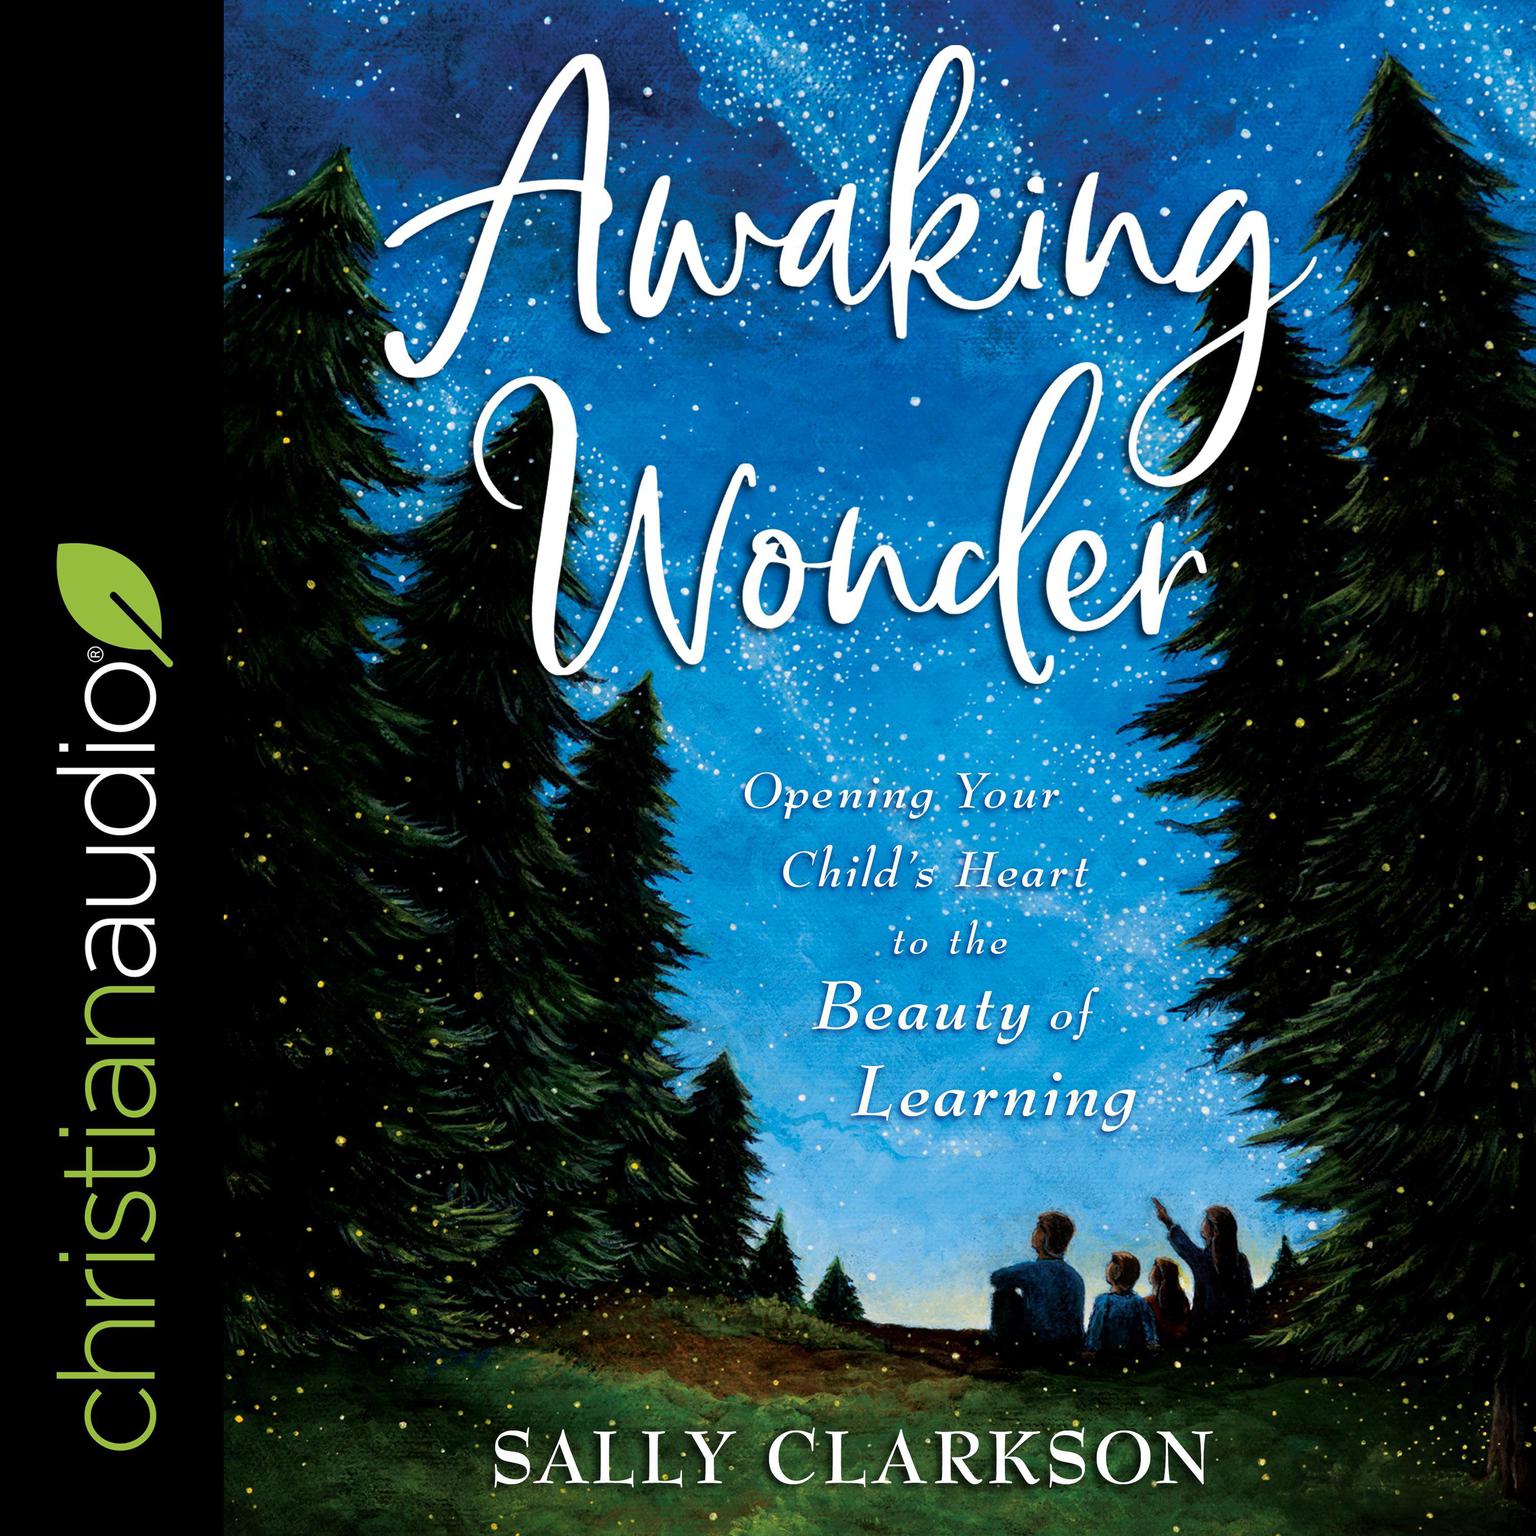 Awaking Wonder: Opening Your Childs Heart to the Beauty of Learning Audiobook, by Sally Clarkson